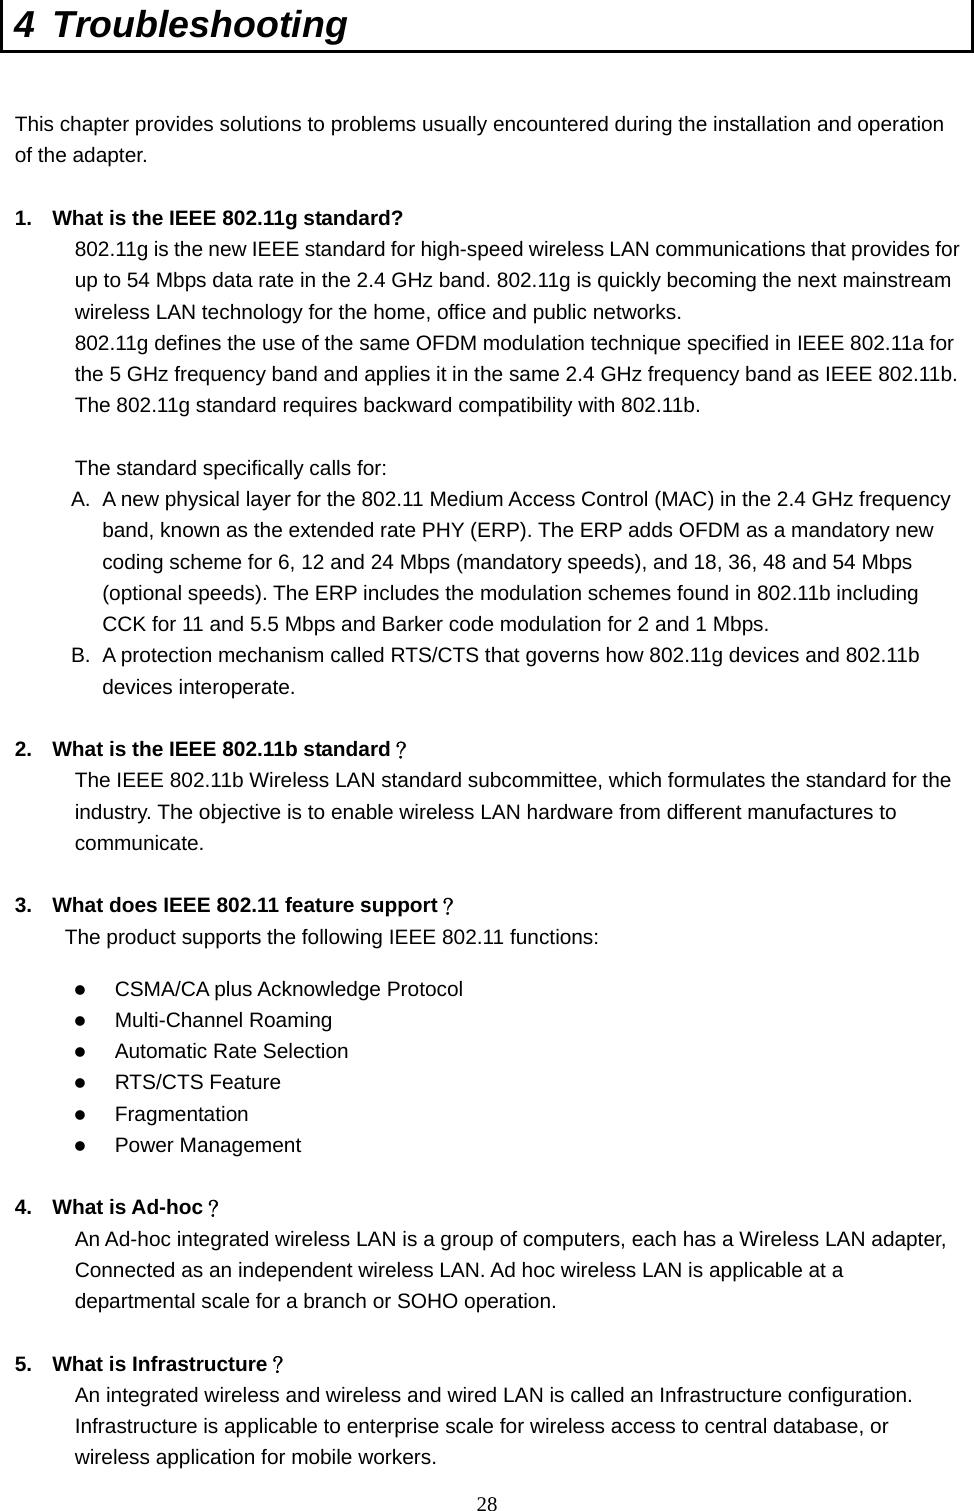  28 4 Troubleshooting  This chapter provides solutions to problems usually encountered during the installation and operation of the adapter.    1.  What is the IEEE 802.11g standard? 802.11g is the new IEEE standard for high-speed wireless LAN communications that provides for up to 54 Mbps data rate in the 2.4 GHz band. 802.11g is quickly becoming the next mainstream wireless LAN technology for the home, office and public networks.   802.11g defines the use of the same OFDM modulation technique specified in IEEE 802.11a for the 5 GHz frequency band and applies it in the same 2.4 GHz frequency band as IEEE 802.11b. The 802.11g standard requires backward compatibility with 802.11b.  The standard specifically calls for:   A.  A new physical layer for the 802.11 Medium Access Control (MAC) in the 2.4 GHz frequency band, known as the extended rate PHY (ERP). The ERP adds OFDM as a mandatory new coding scheme for 6, 12 and 24 Mbps (mandatory speeds), and 18, 36, 48 and 54 Mbps (optional speeds). The ERP includes the modulation schemes found in 802.11b including CCK for 11 and 5.5 Mbps and Barker code modulation for 2 and 1 Mbps. B.  A protection mechanism called RTS/CTS that governs how 802.11g devices and 802.11b devices interoperate.  2.  What is the IEEE 802.11b standard？ The IEEE 802.11b Wireless LAN standard subcommittee, which formulates the standard for the industry. The objective is to enable wireless LAN hardware from different manufactures to communicate.  3.  What does IEEE 802.11 feature support？ The product supports the following IEEE 802.11 functions:   CSMA/CA plus Acknowledge Protocol   Multi-Channel Roaming   Automatic Rate Selection   RTS/CTS Feature   Fragmentation   Power Management  4. What is Ad-hoc？ An Ad-hoc integrated wireless LAN is a group of computers, each has a Wireless LAN adapter, Connected as an independent wireless LAN. Ad hoc wireless LAN is applicable at a departmental scale for a branch or SOHO operation.  5.  What is Infrastructure？ An integrated wireless and wireless and wired LAN is called an Infrastructure configuration. Infrastructure is applicable to enterprise scale for wireless access to central database, or wireless application for mobile workers. 